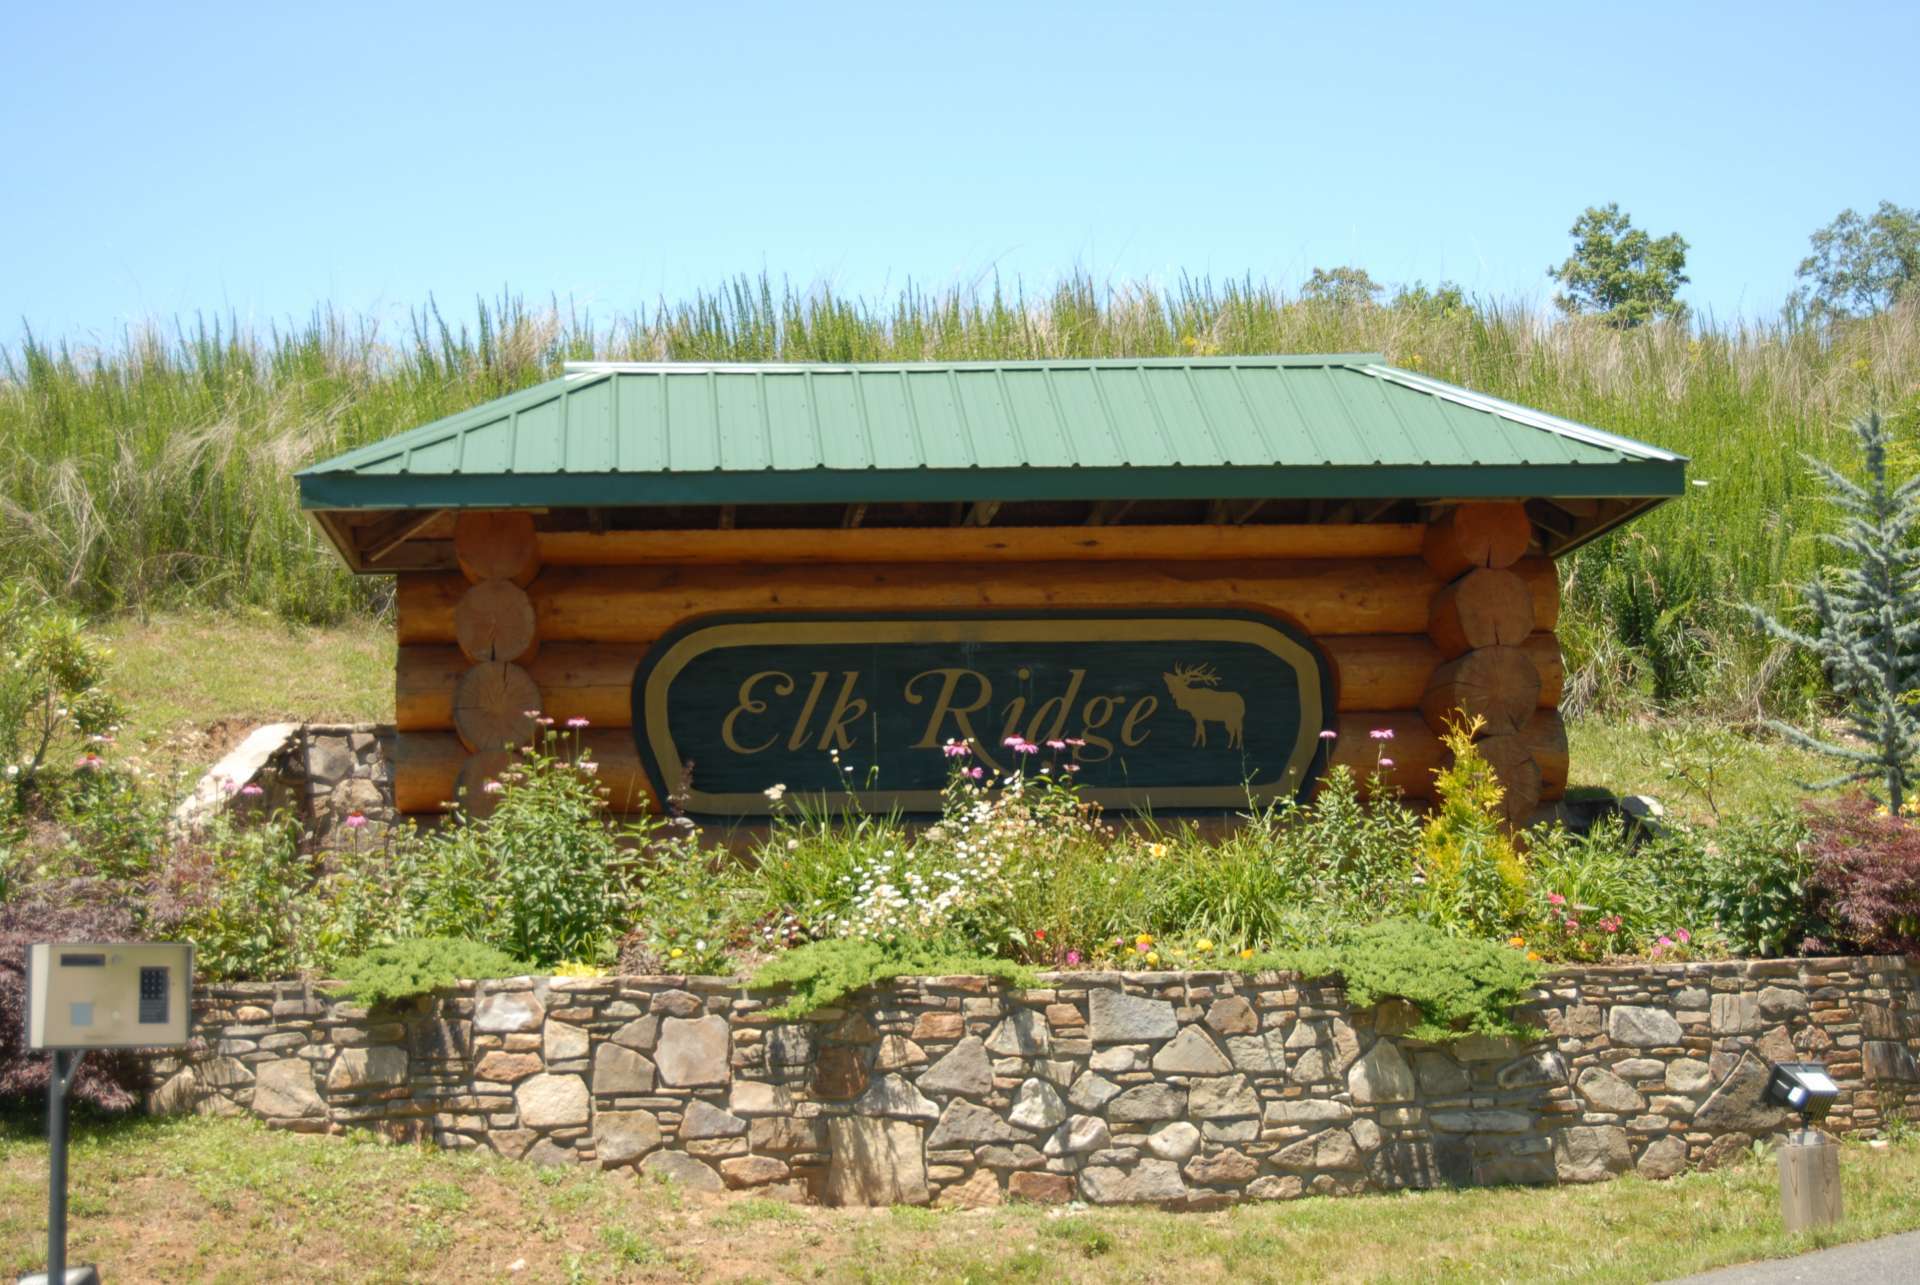 Elk Ridge is an exclusive gated community in the Todd area of Southern Ashe County offering paved streets, underground utilities , including fiber optic cable, and an easy commute to Boone and West Jefferson and only minutes to the New River.